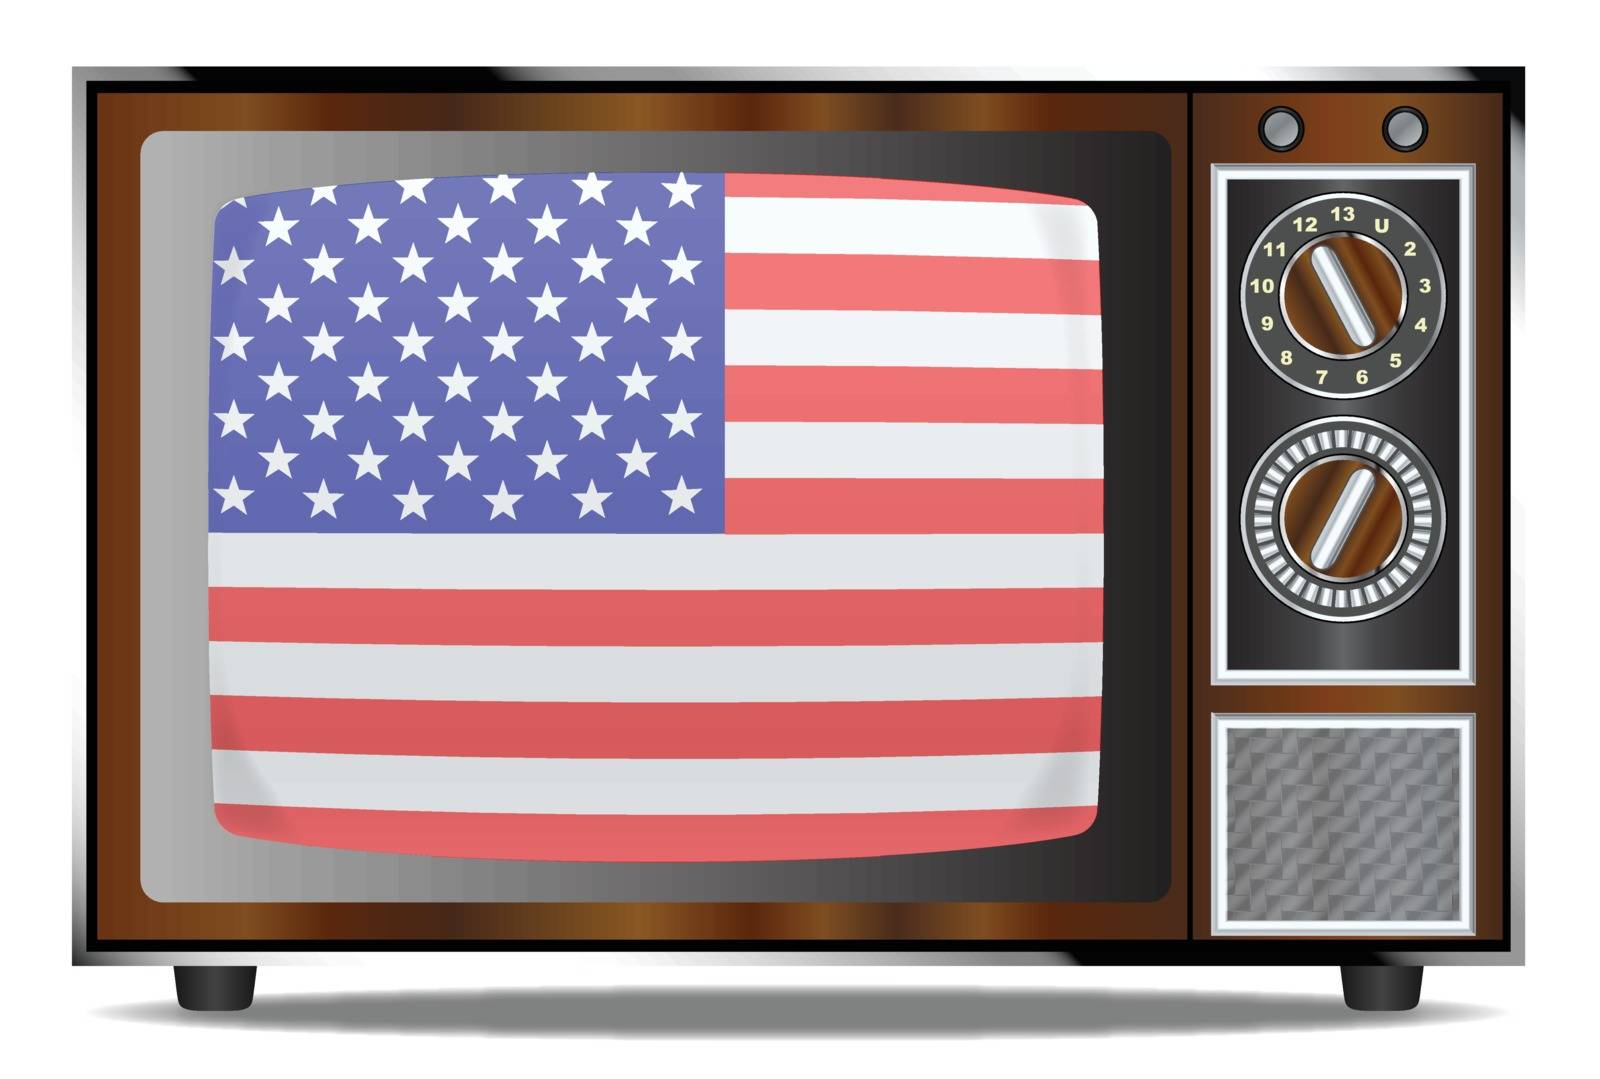 An old wood surround television receiver over a white background with Old Glory